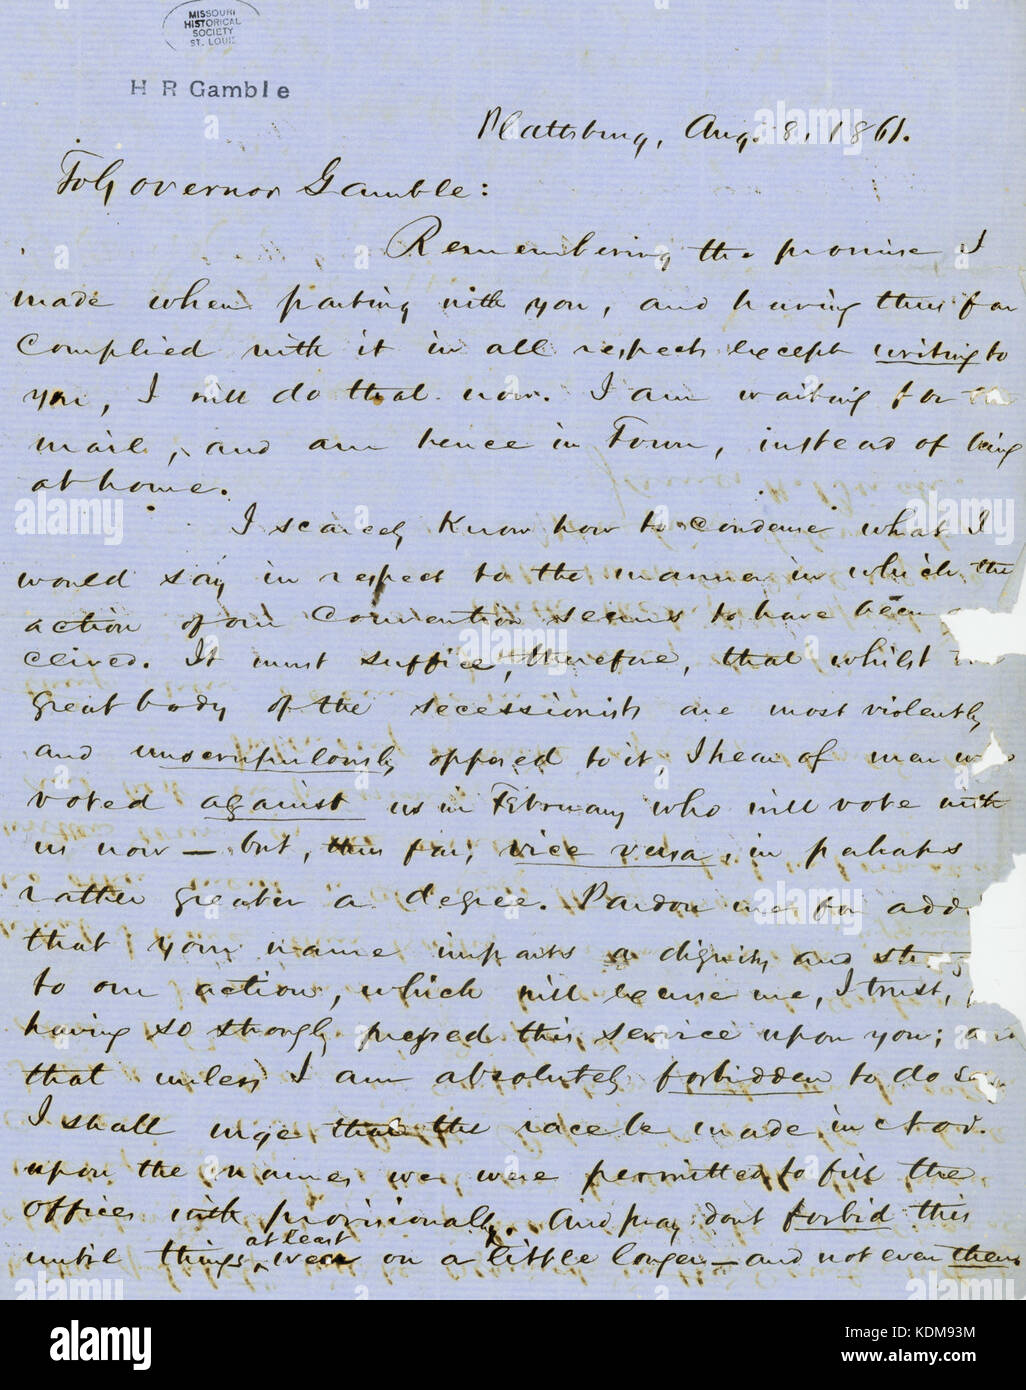 Letter signed James H. Birch, Plattsburg, to Governor Gamble (Hamilton R. Gamble), August 8, 1861 Stock Photo